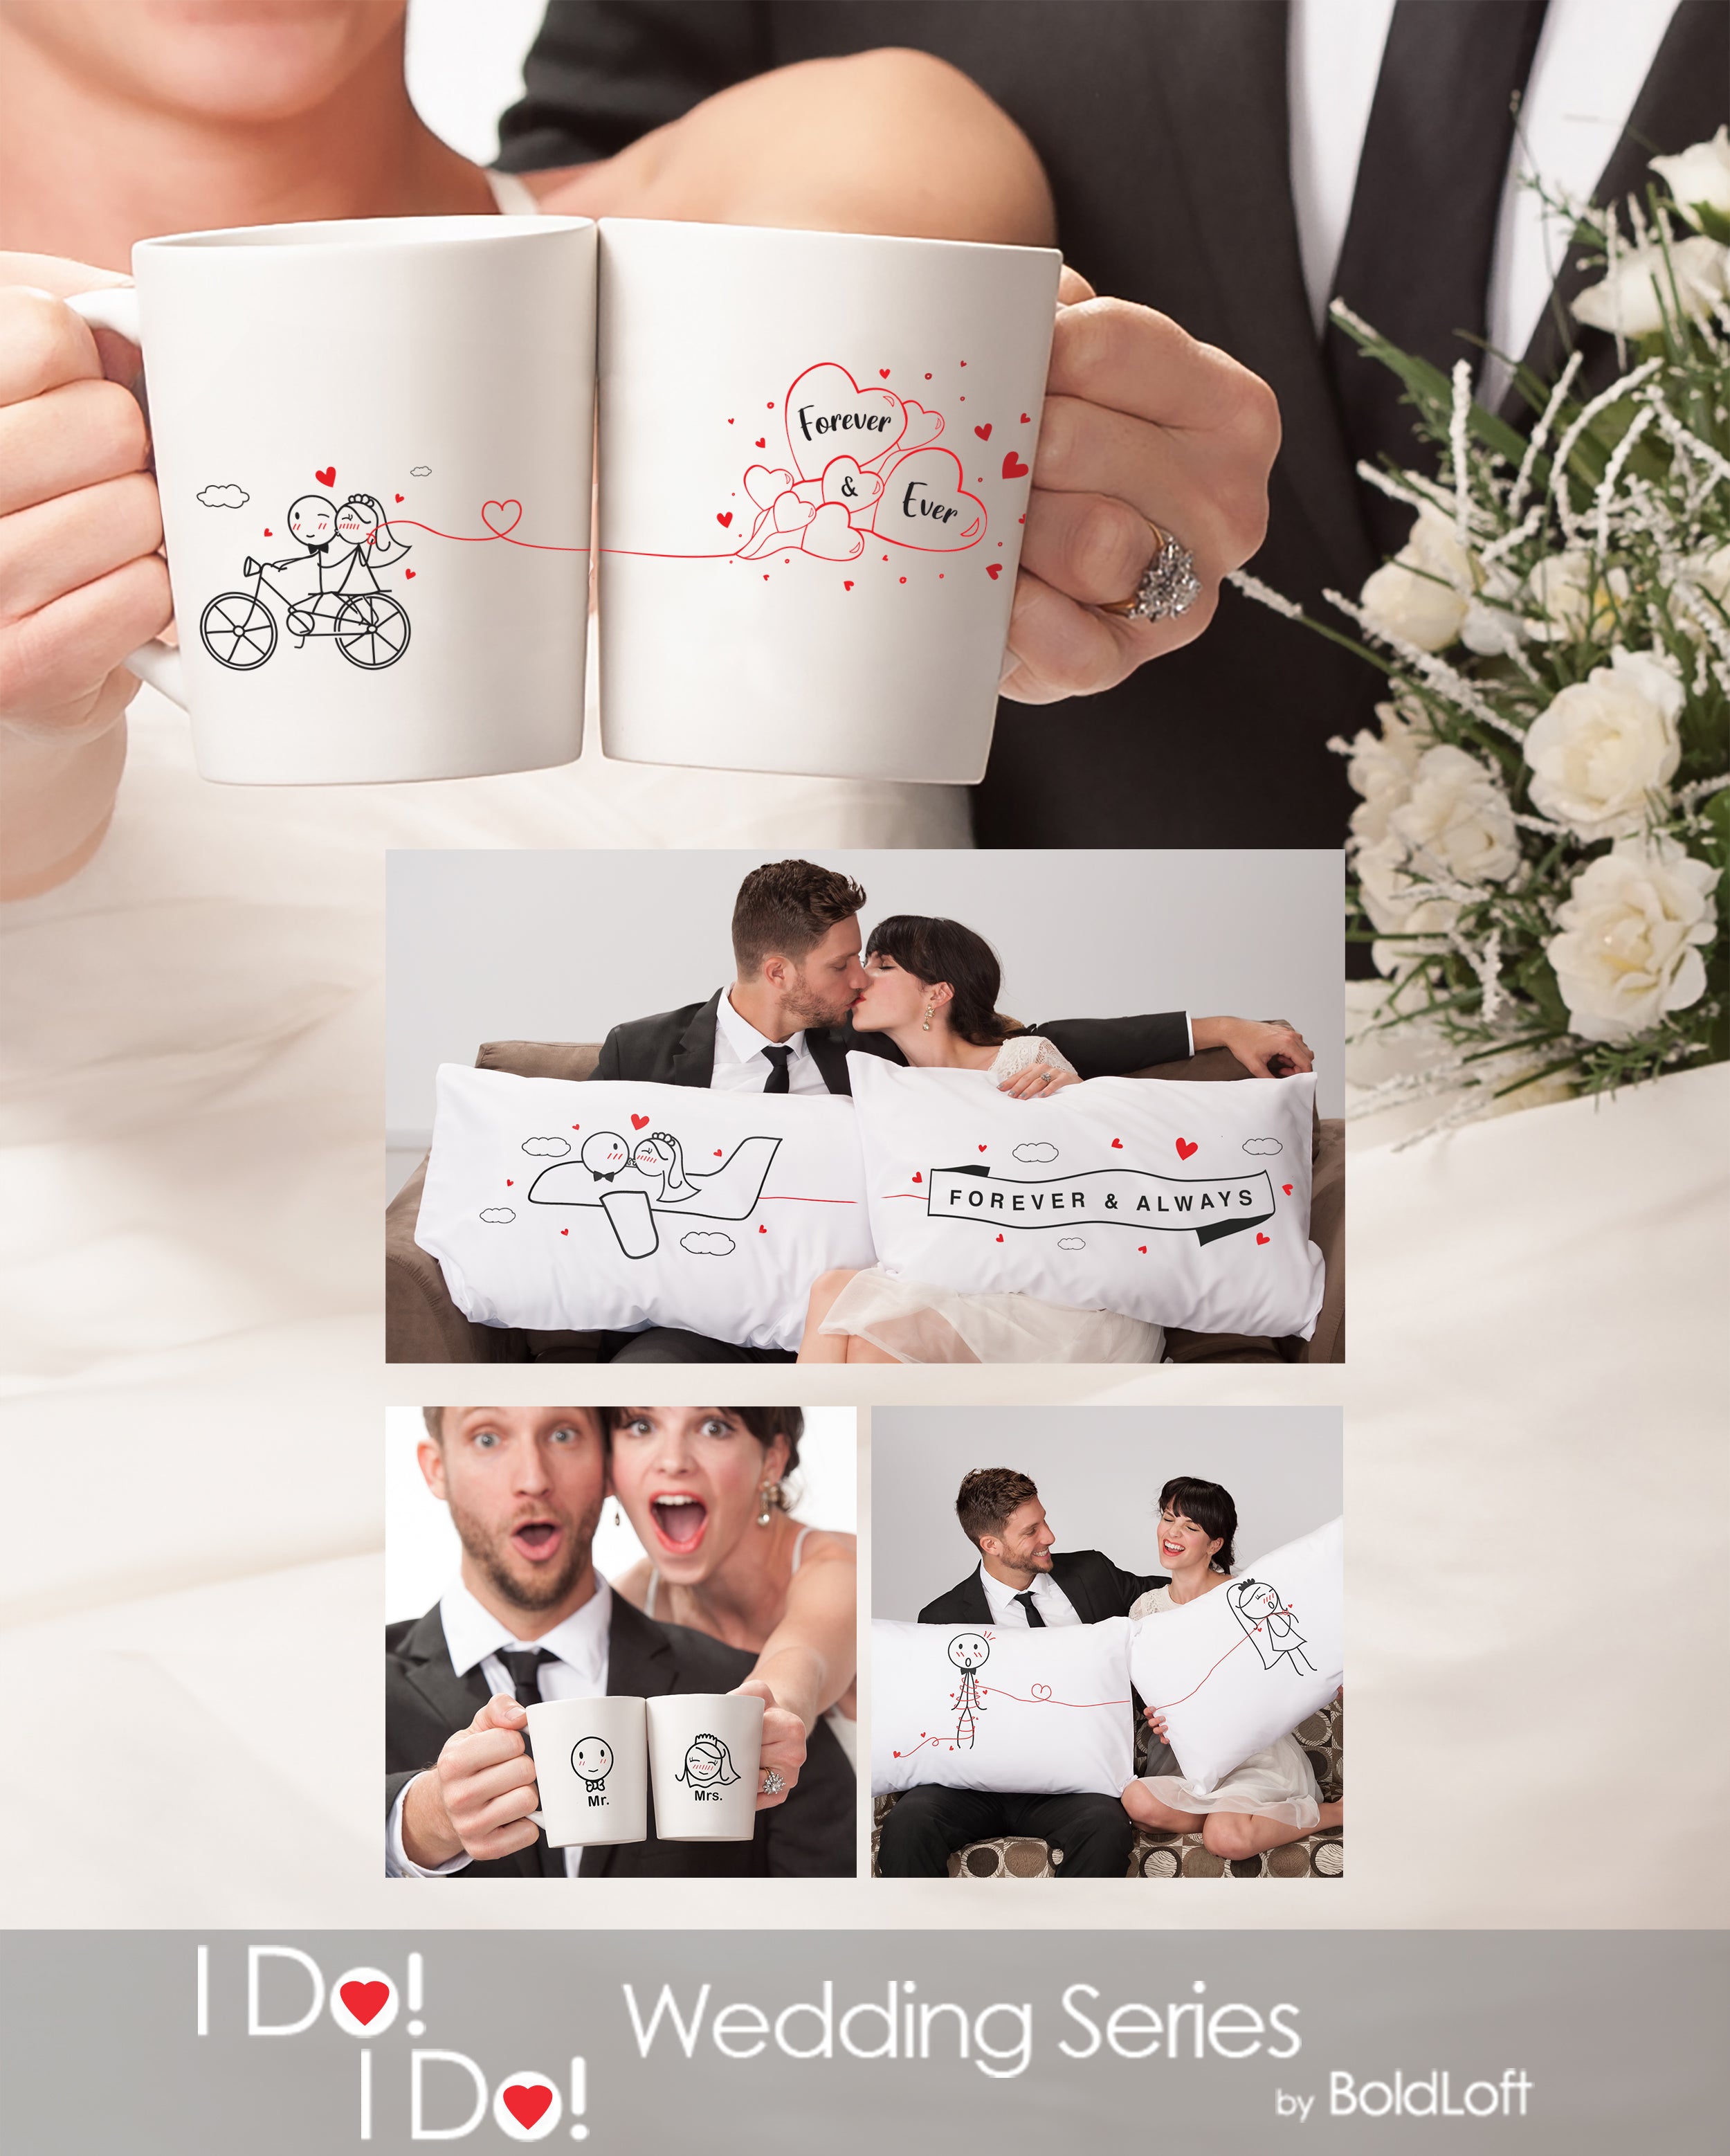 BoldLoft I Do I Do  Wedding Series for bride and groom offers various designs on couple pillowcases, couple mugs, and drinking glasses, featuring two endearing stick figure representations of a bride and groom, perfect for wedding couples.